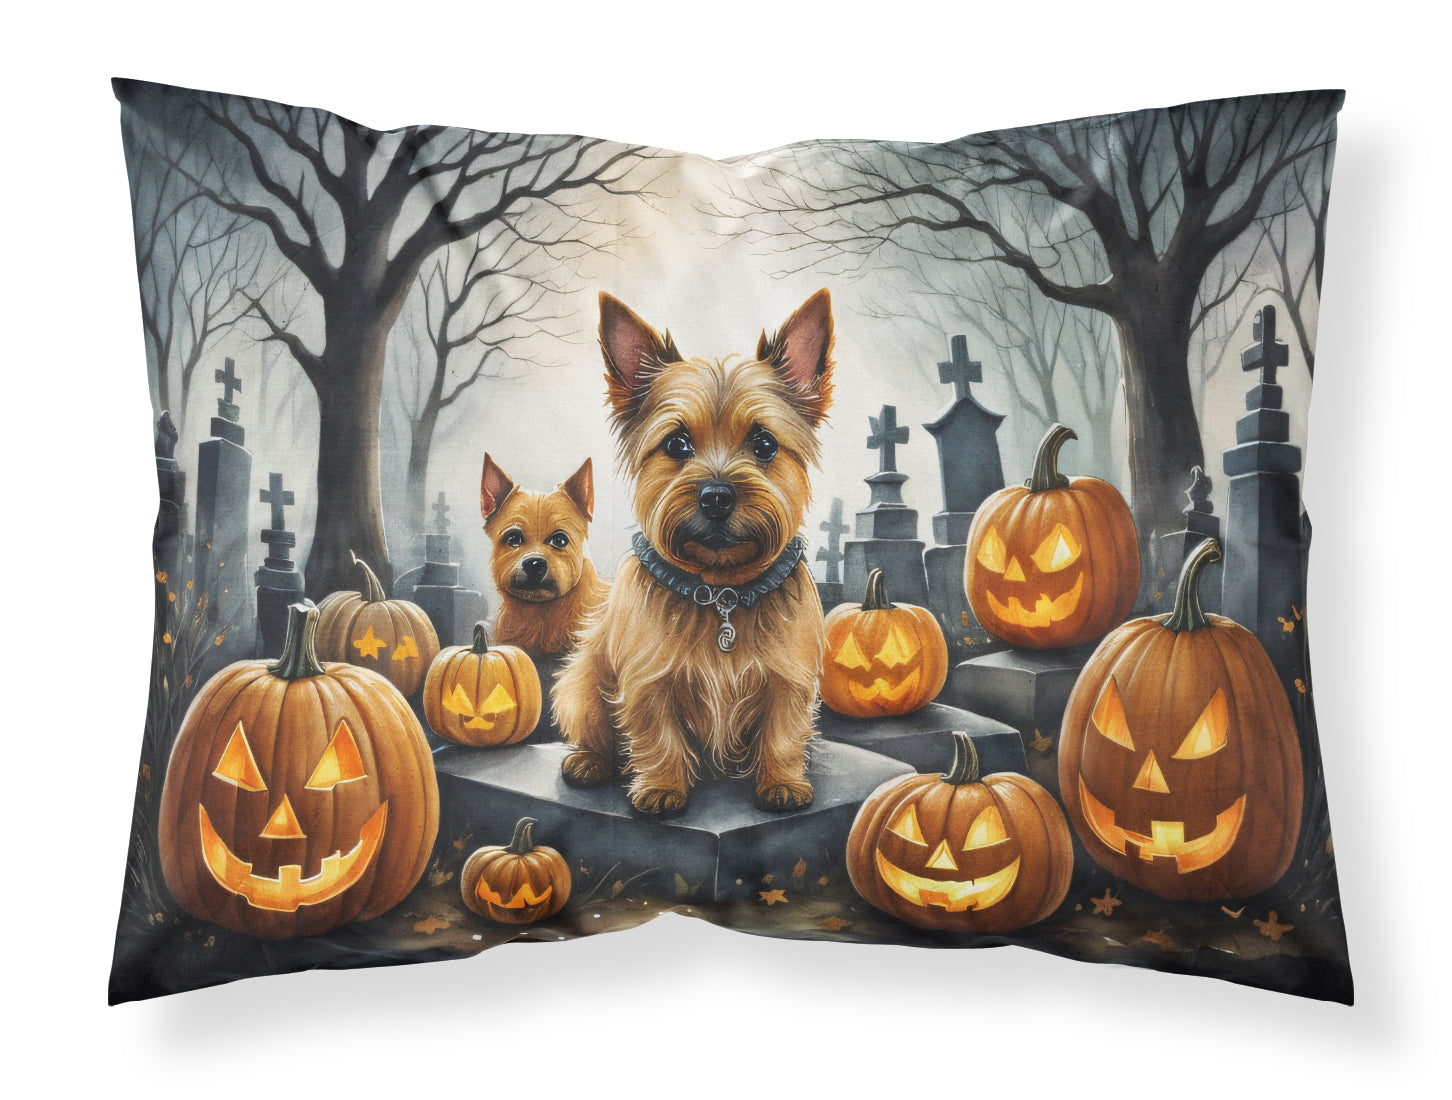 Buy this Norwich Terrier Spooky Halloween Fabric Standard Pillowcase